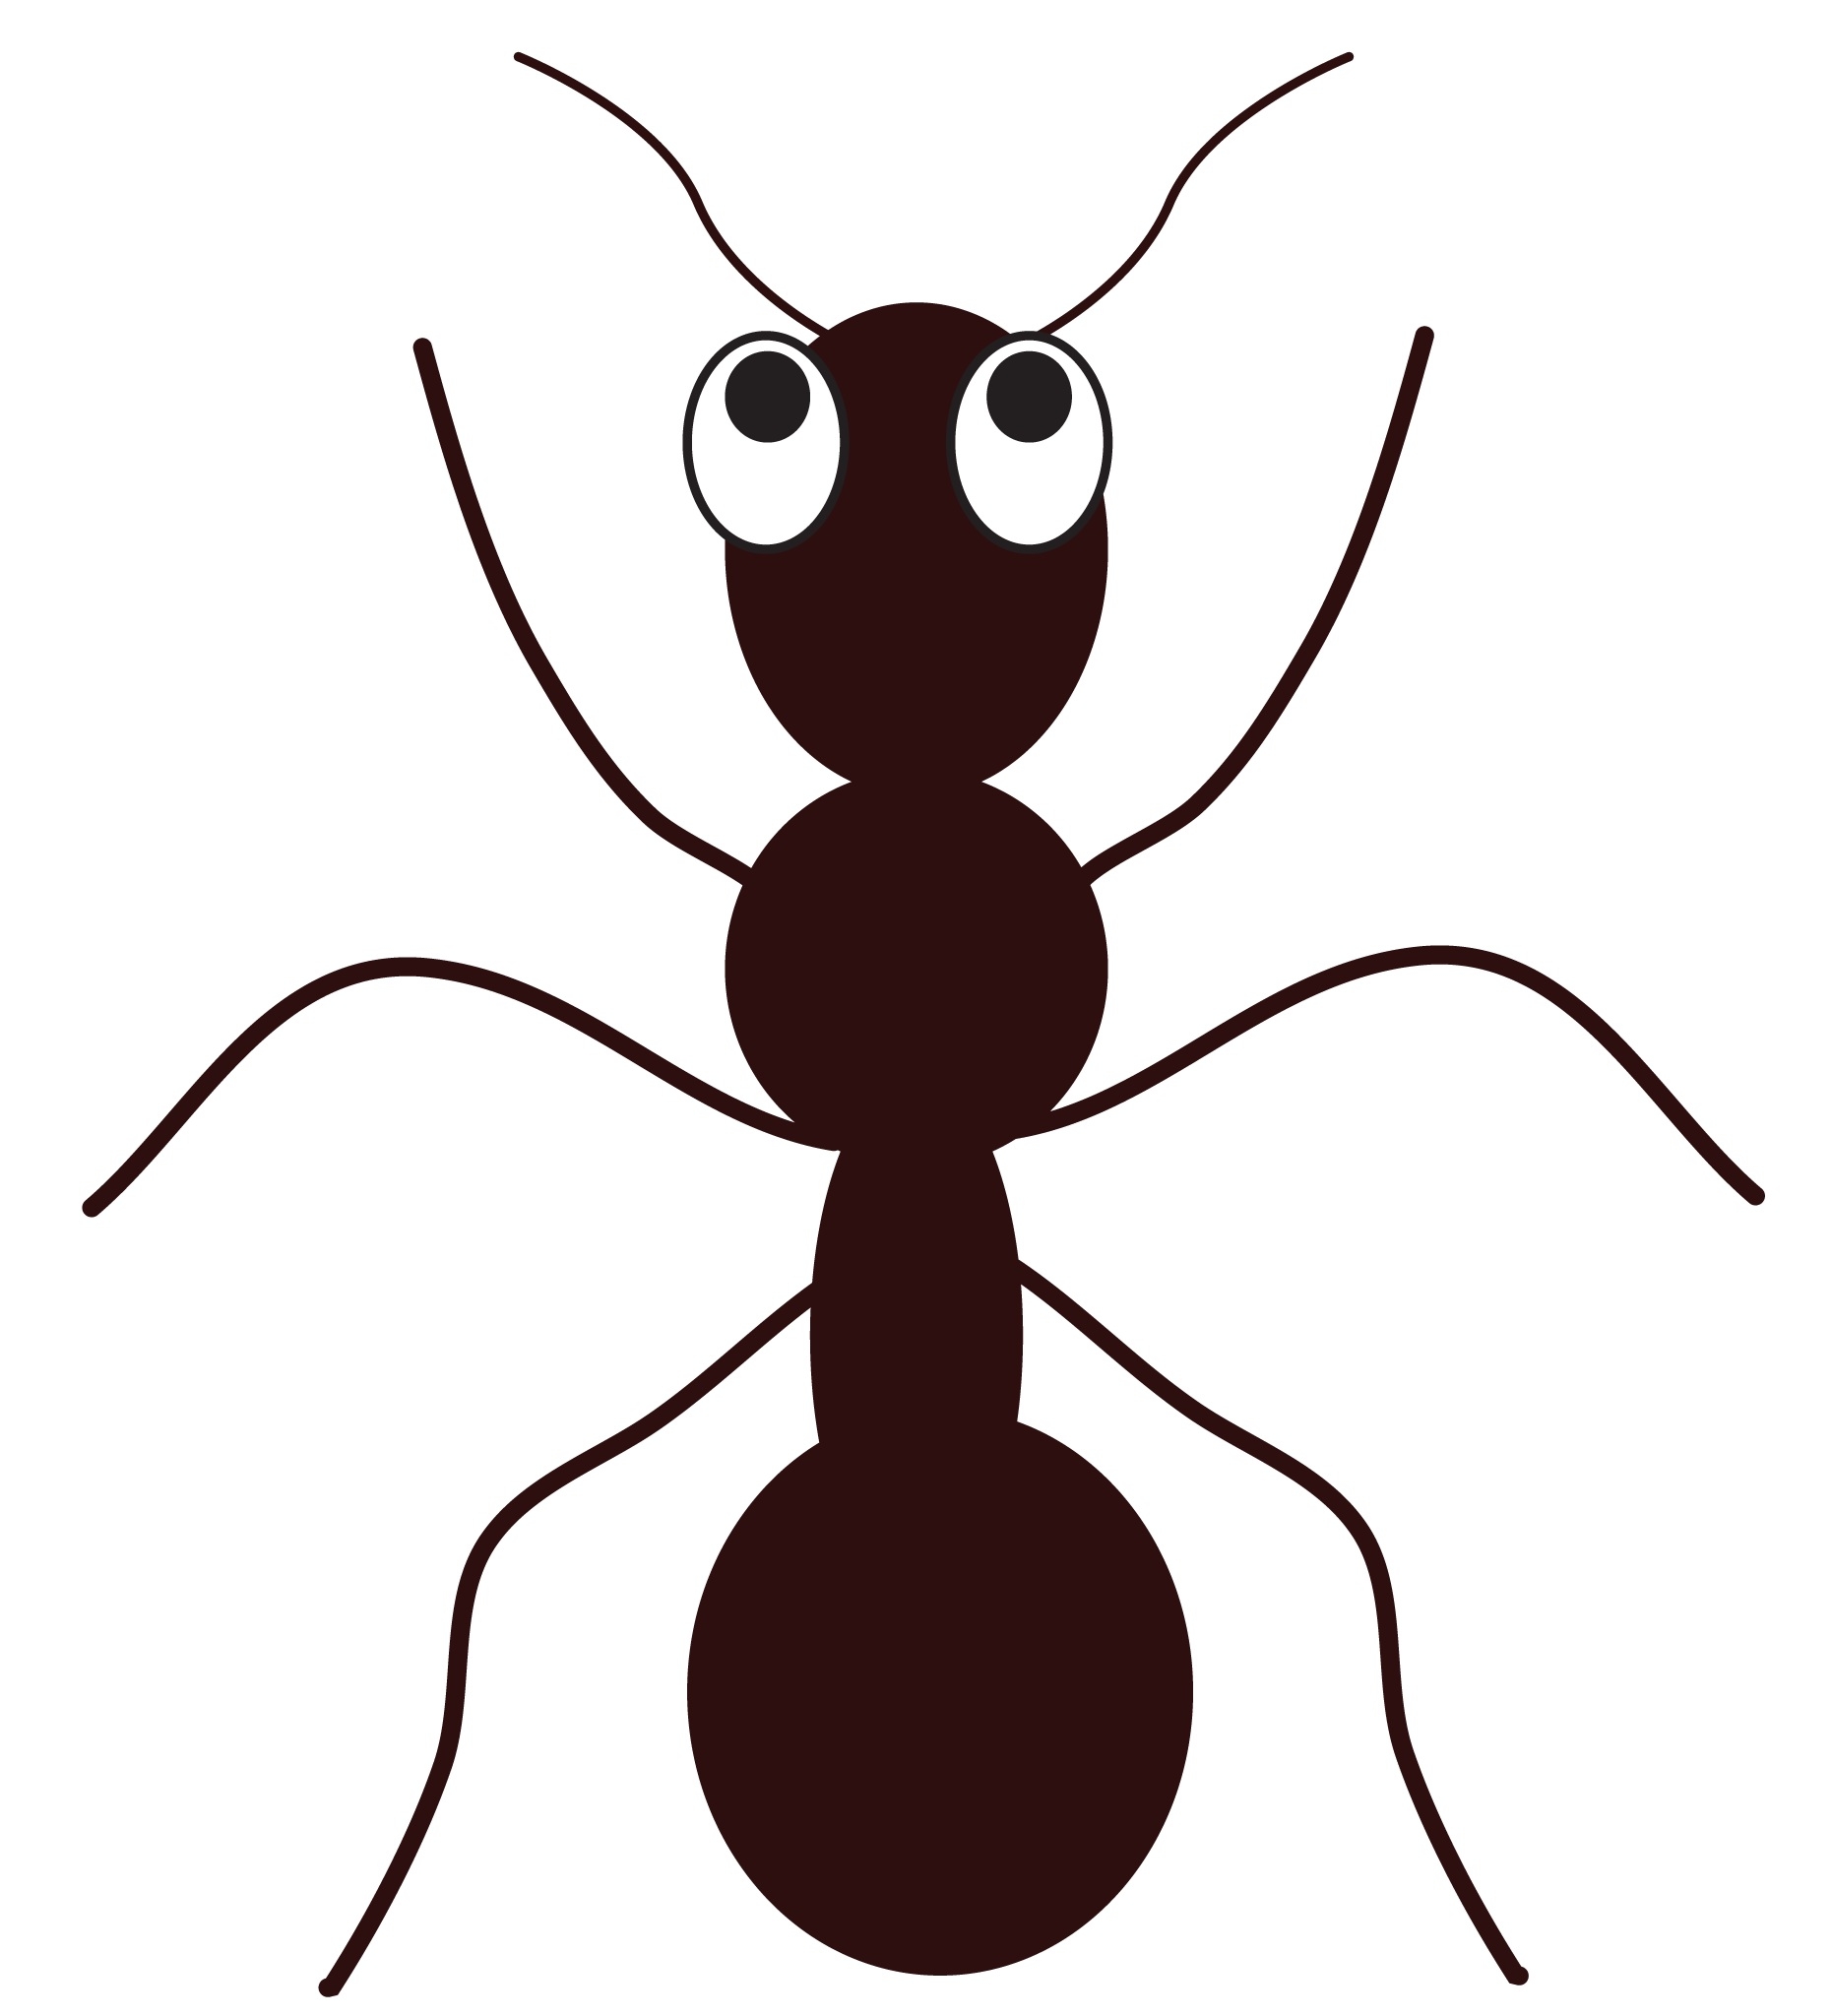 Wonderful of line letter. Ants clipart cute